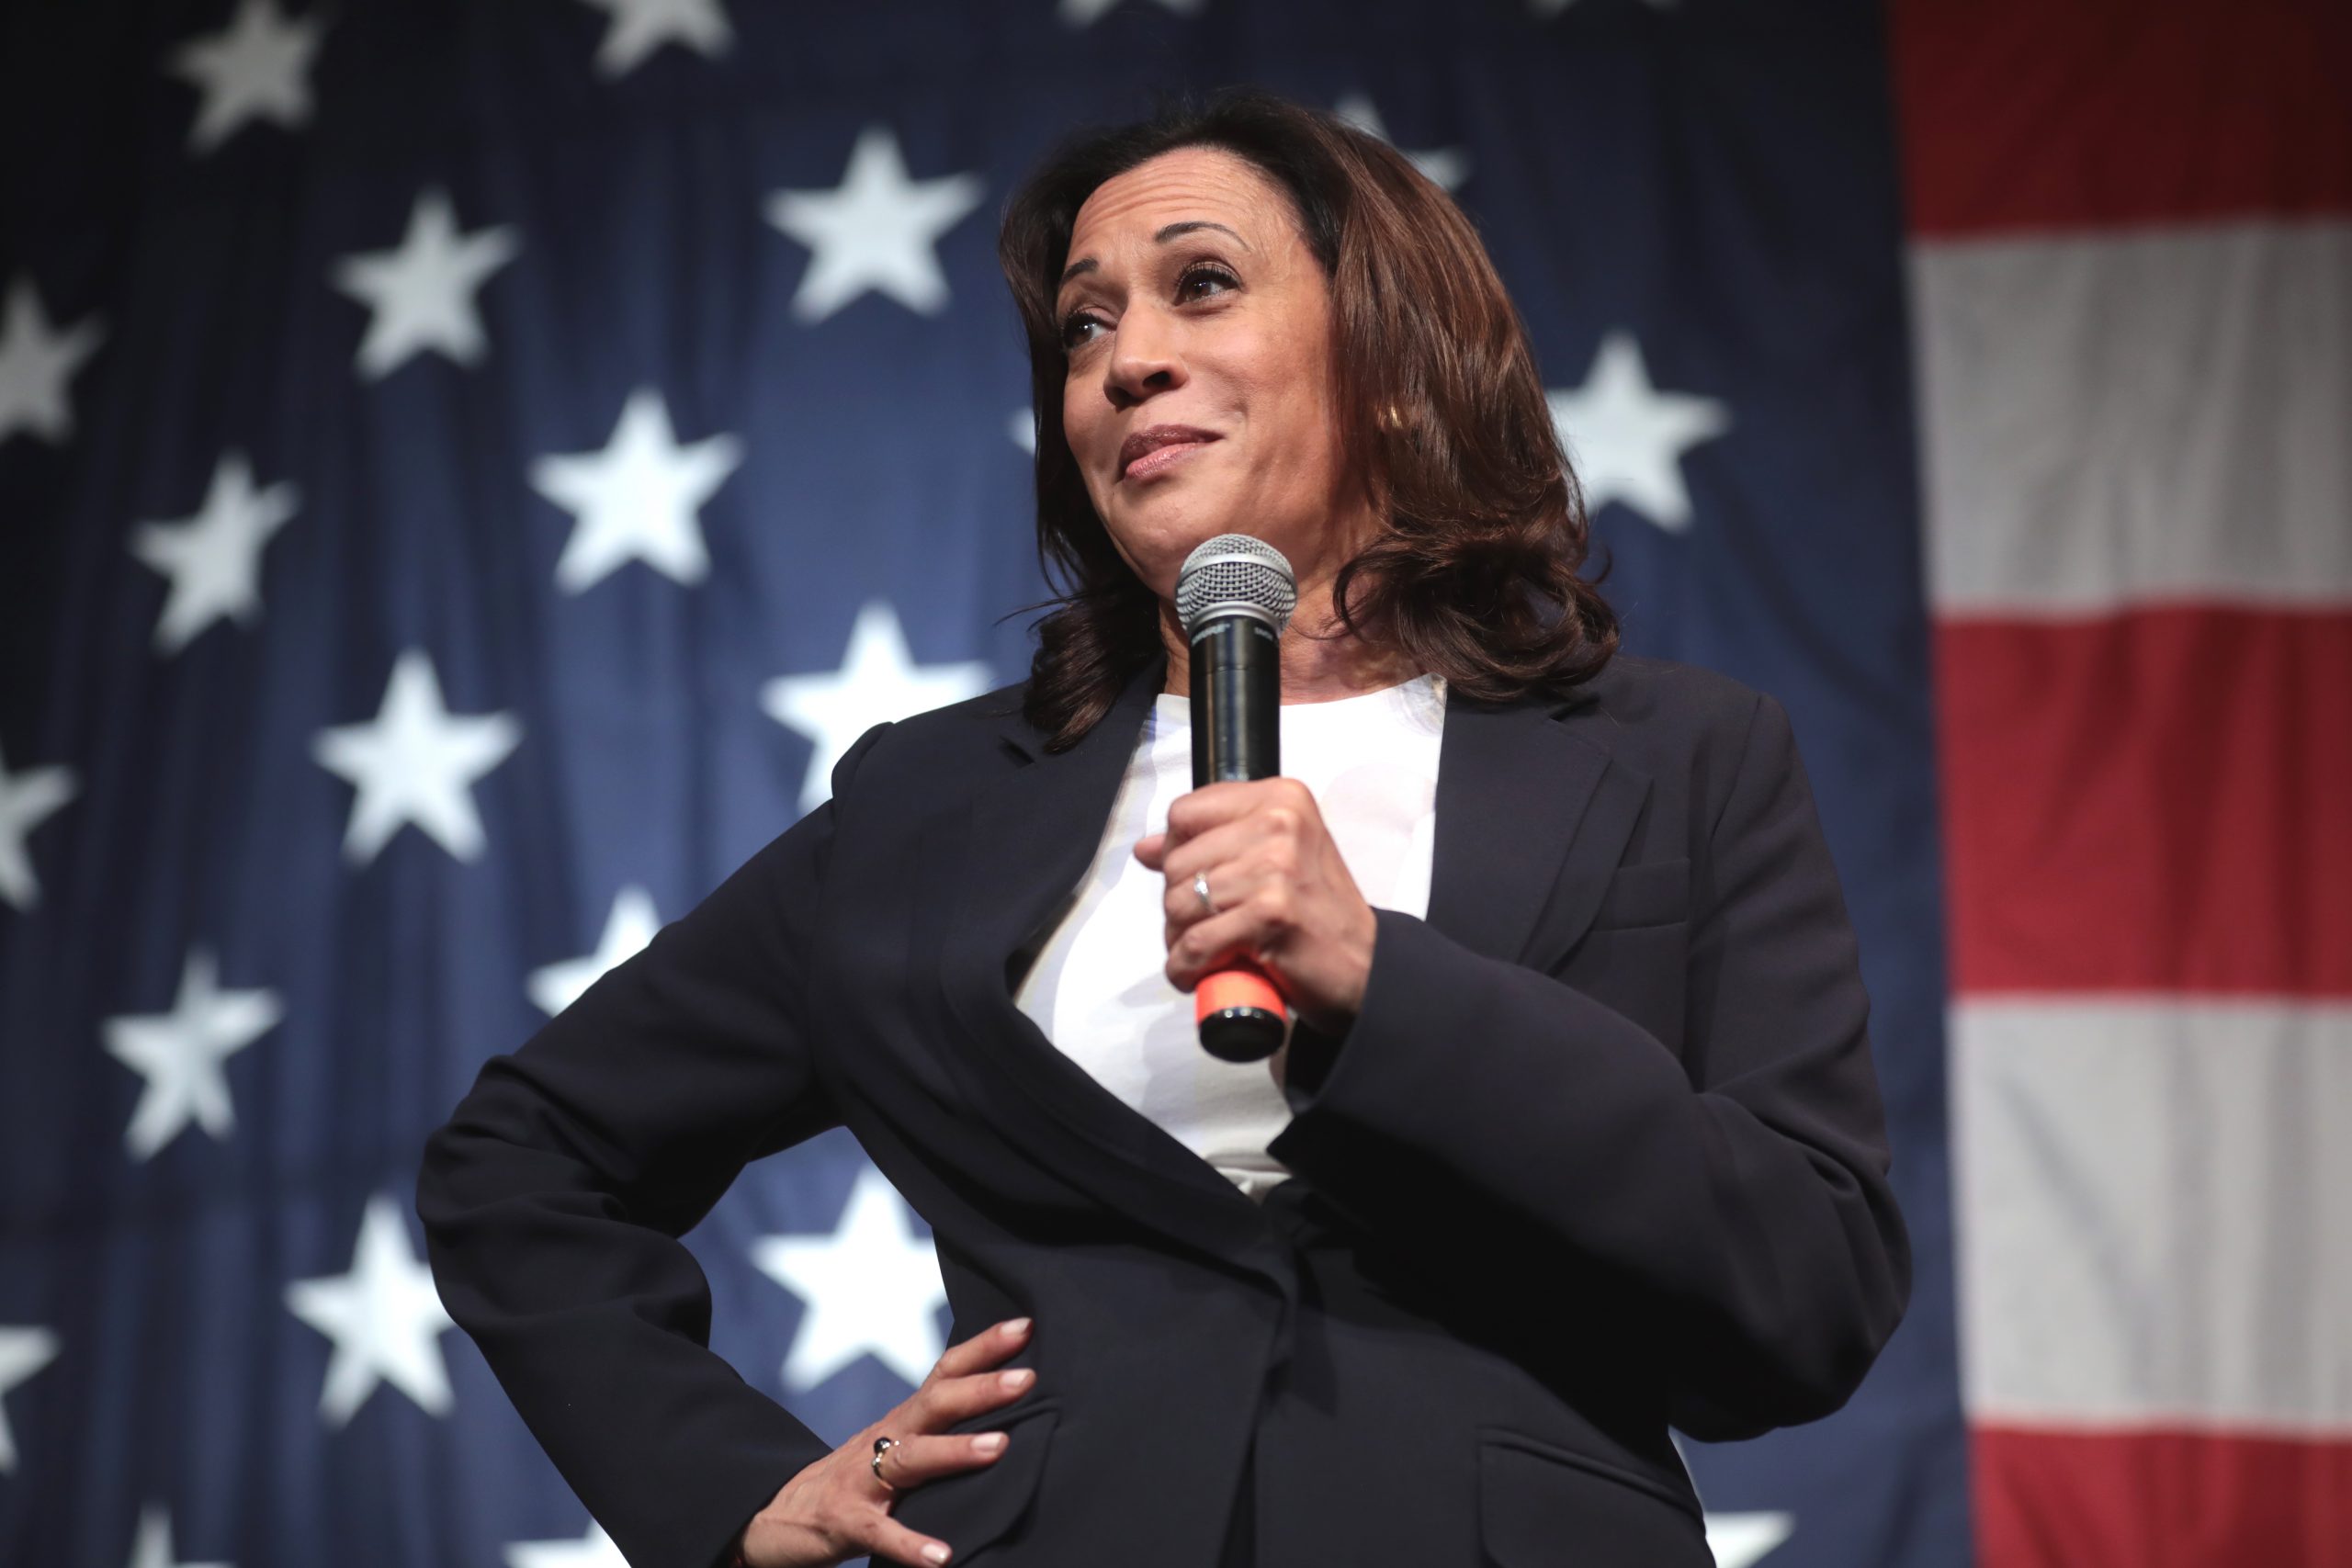 Biden And Harris Refers To Their Ticket As The ‘Harris-Biden’ Administration